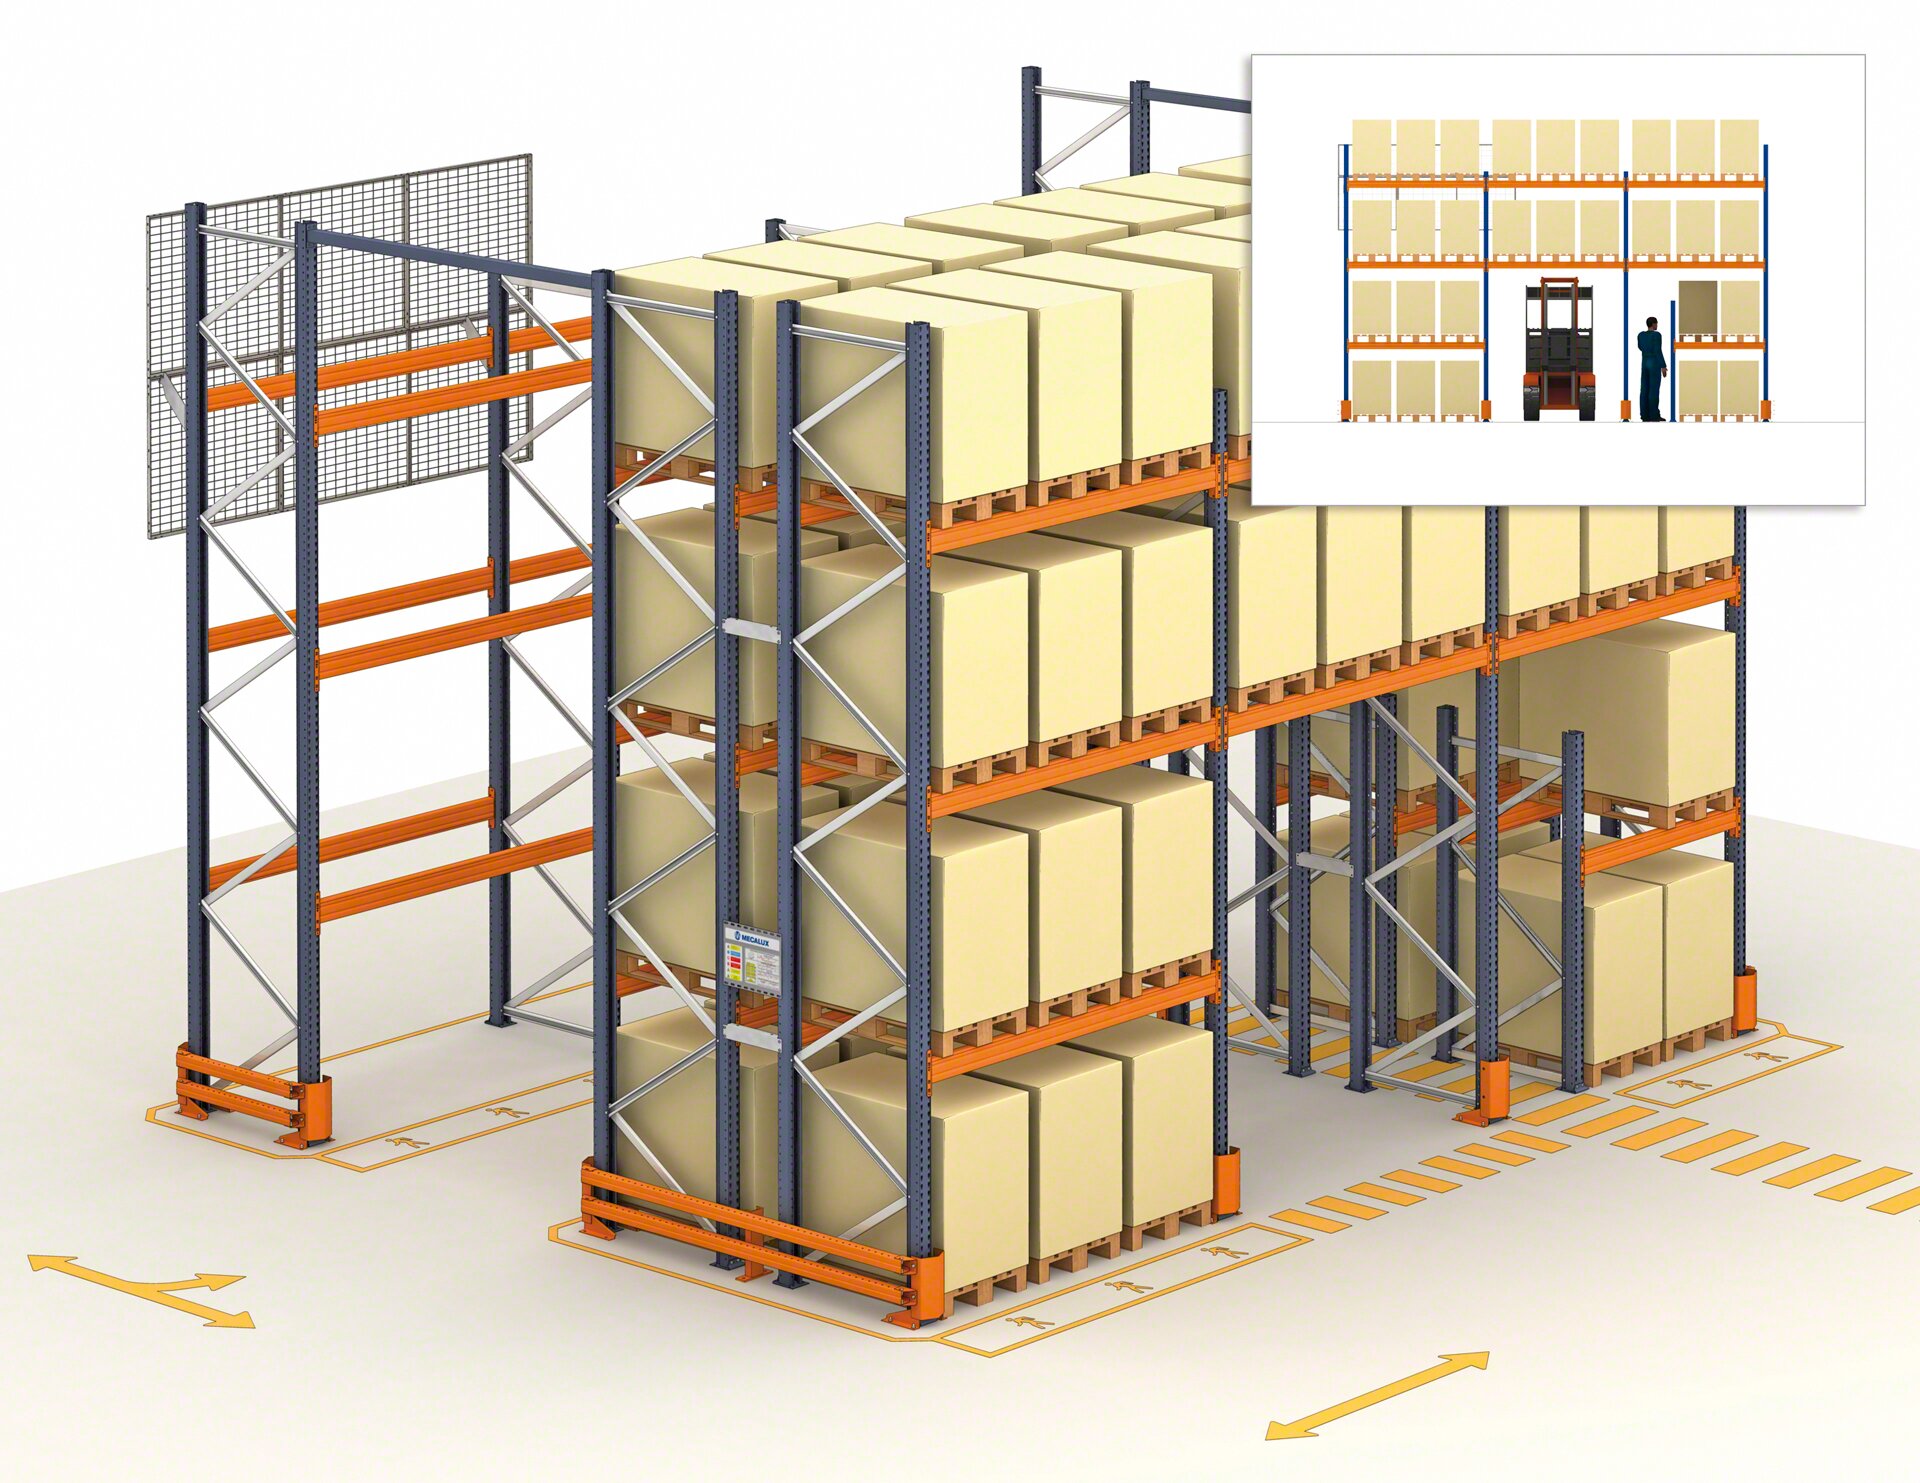 Safety passageways that run under the racks allow forklift and foot traffic